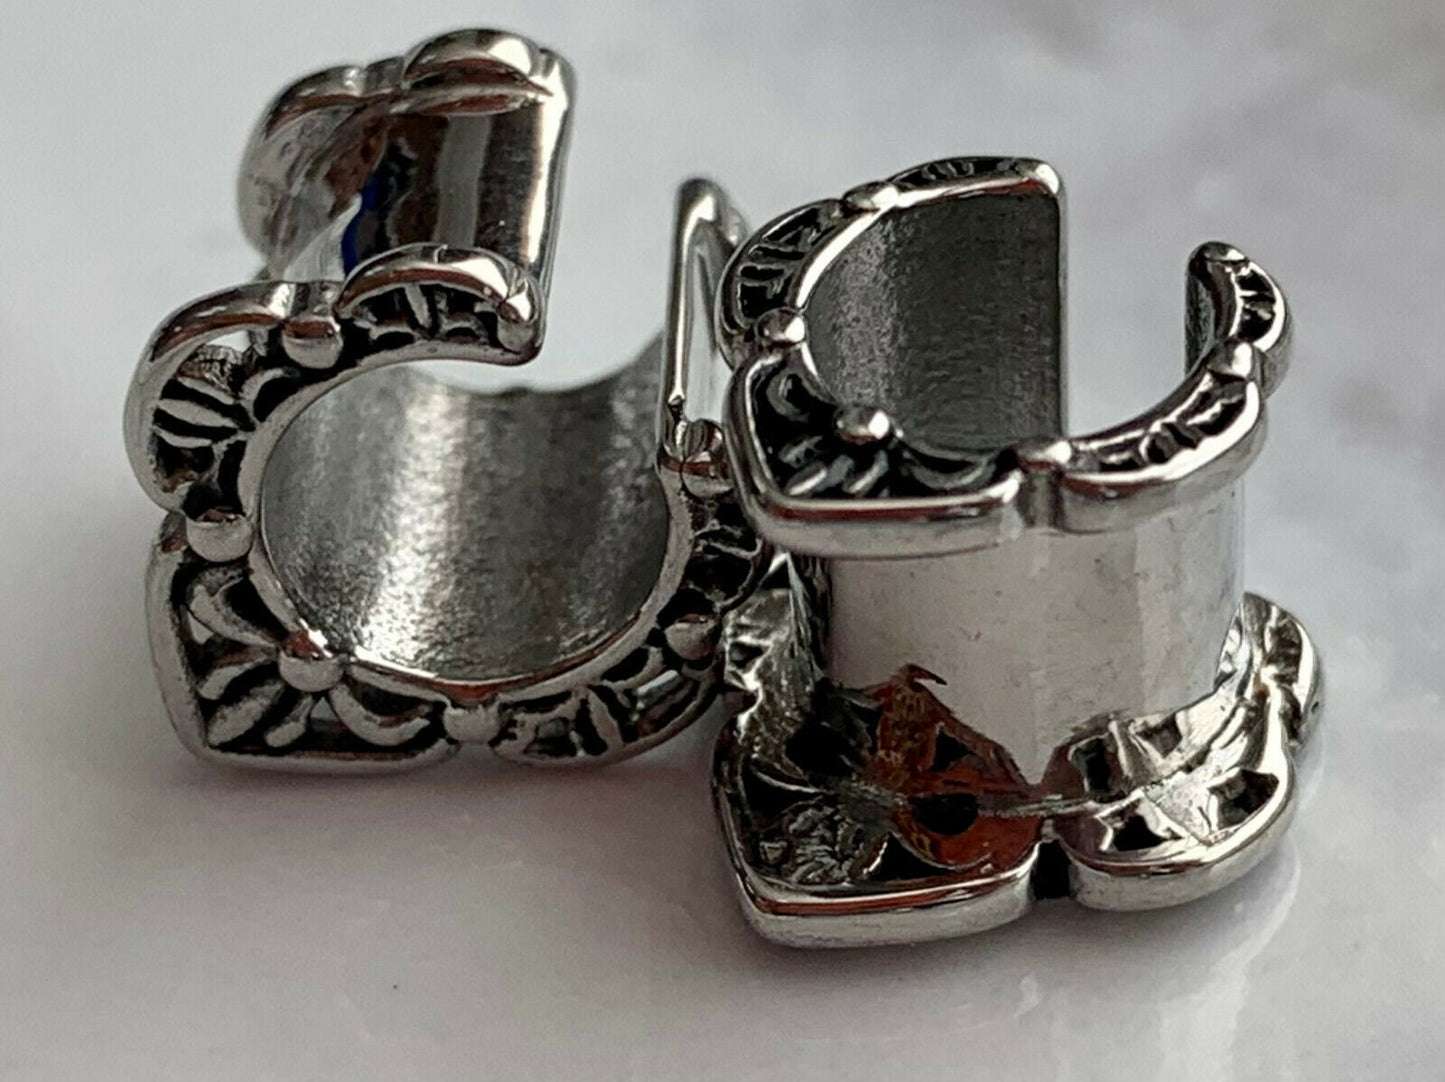 PAIR of Fretwork Ear Spreaders made with 316L ASTM F-138 Surgical Steel Tunnels/Plugs - Gauges 0g (8mm) thru 5/8" (16mm) available!